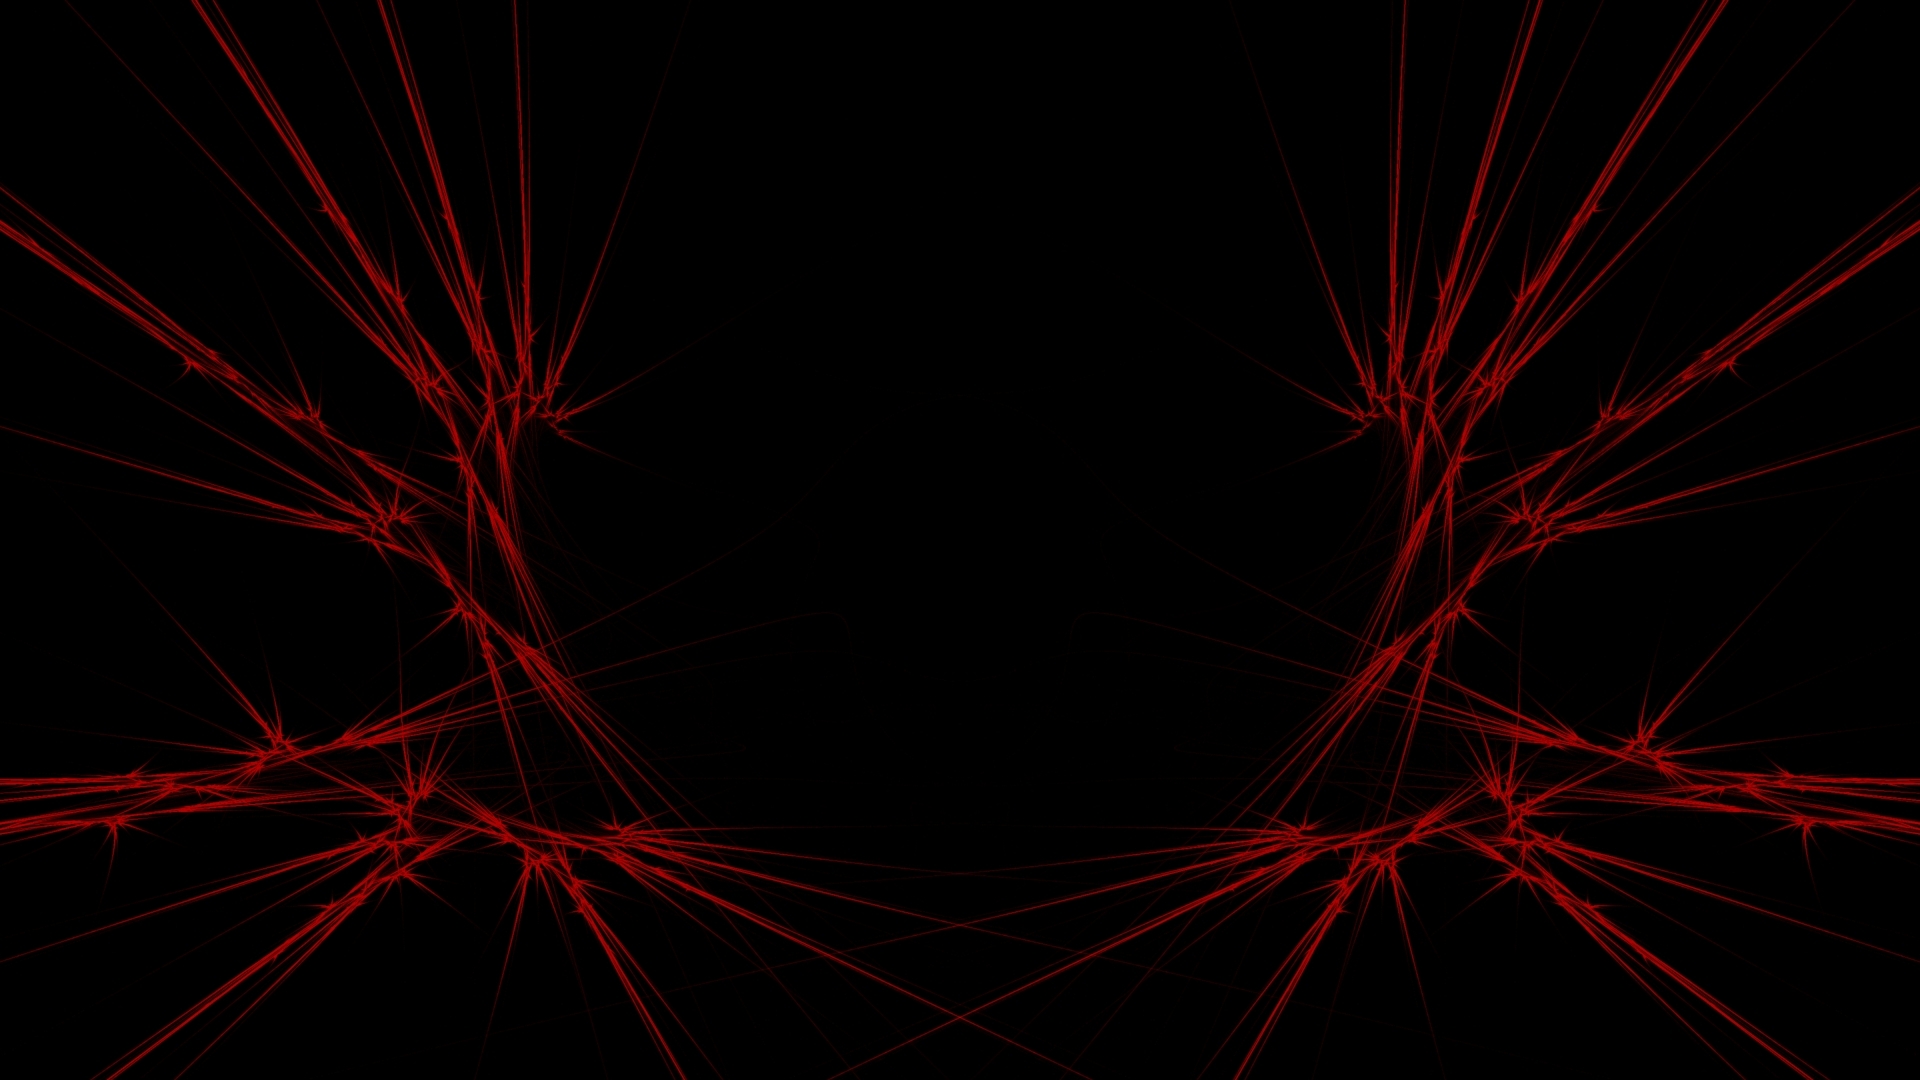  Wallpaper 1920x1080 red black abstract Full HD 1080p HD Background 1920x1080